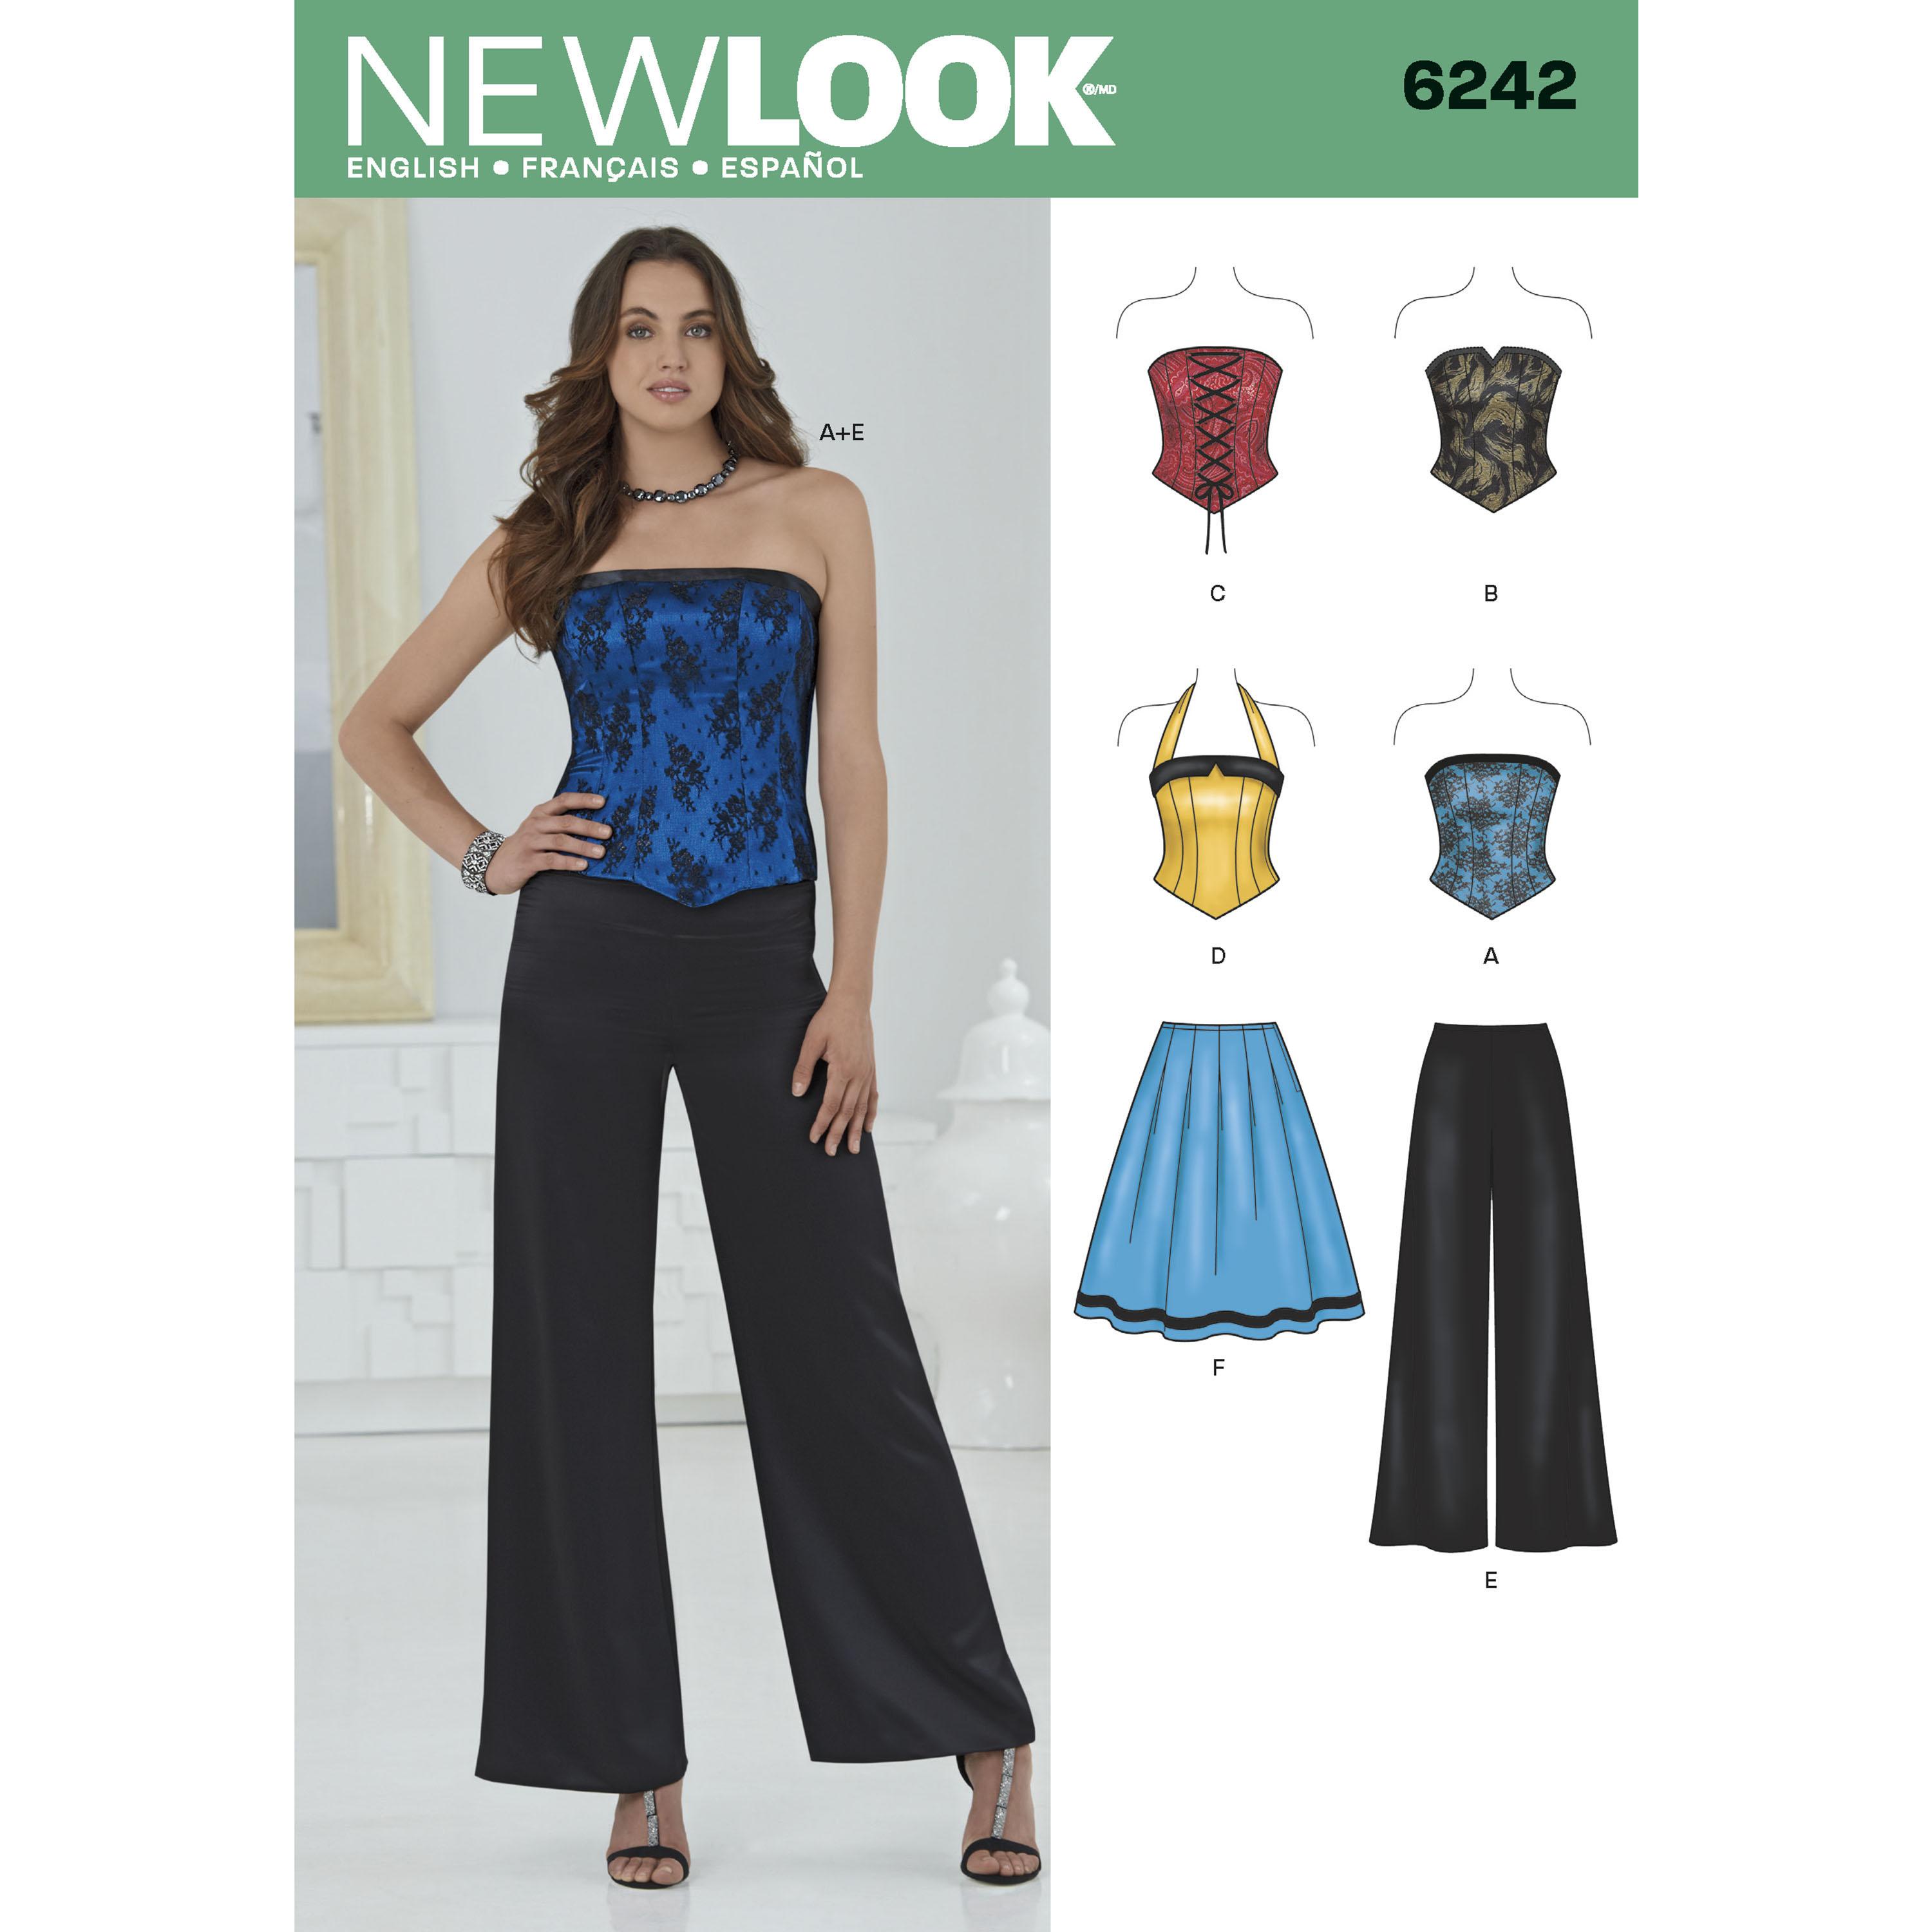 NewLook N6242 Misses' Corset Top, Pants and Skirt